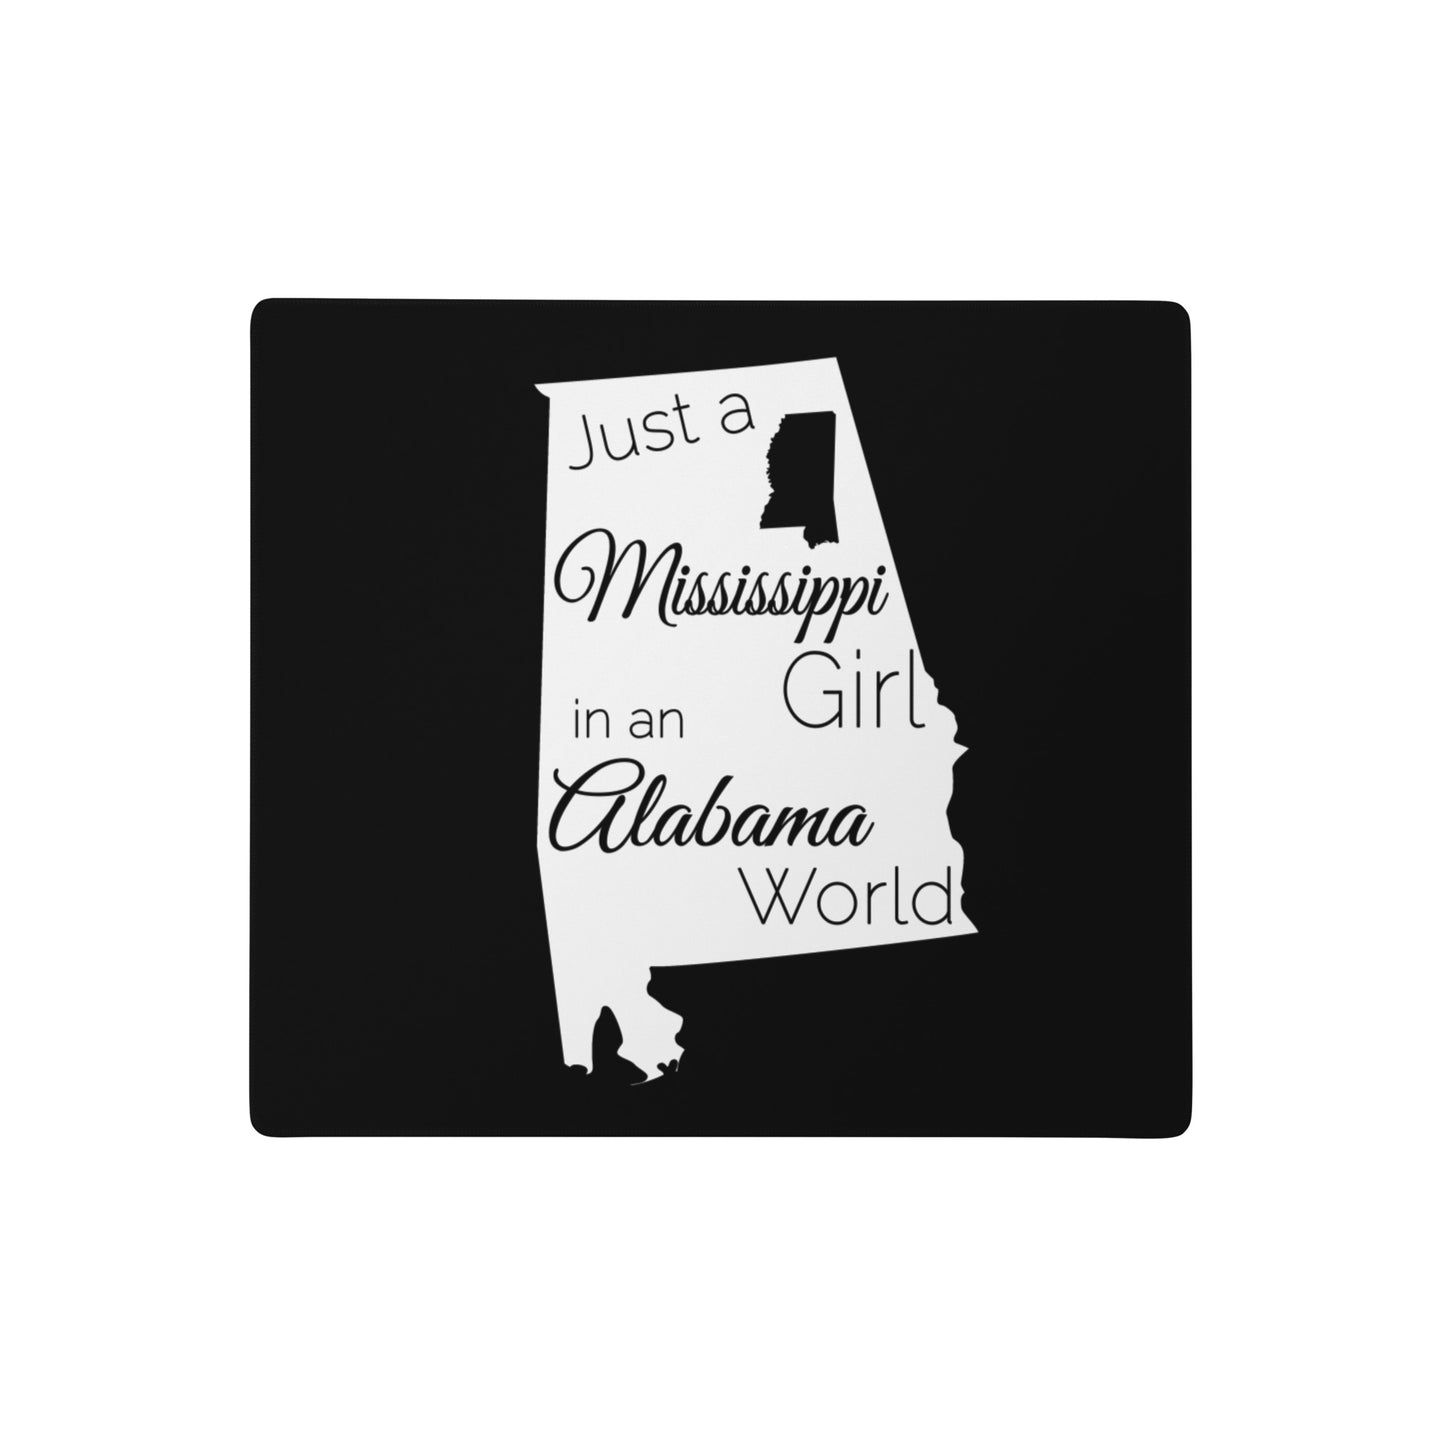 Just a Mississippi Girl in an Alabama World Gaming mouse pad